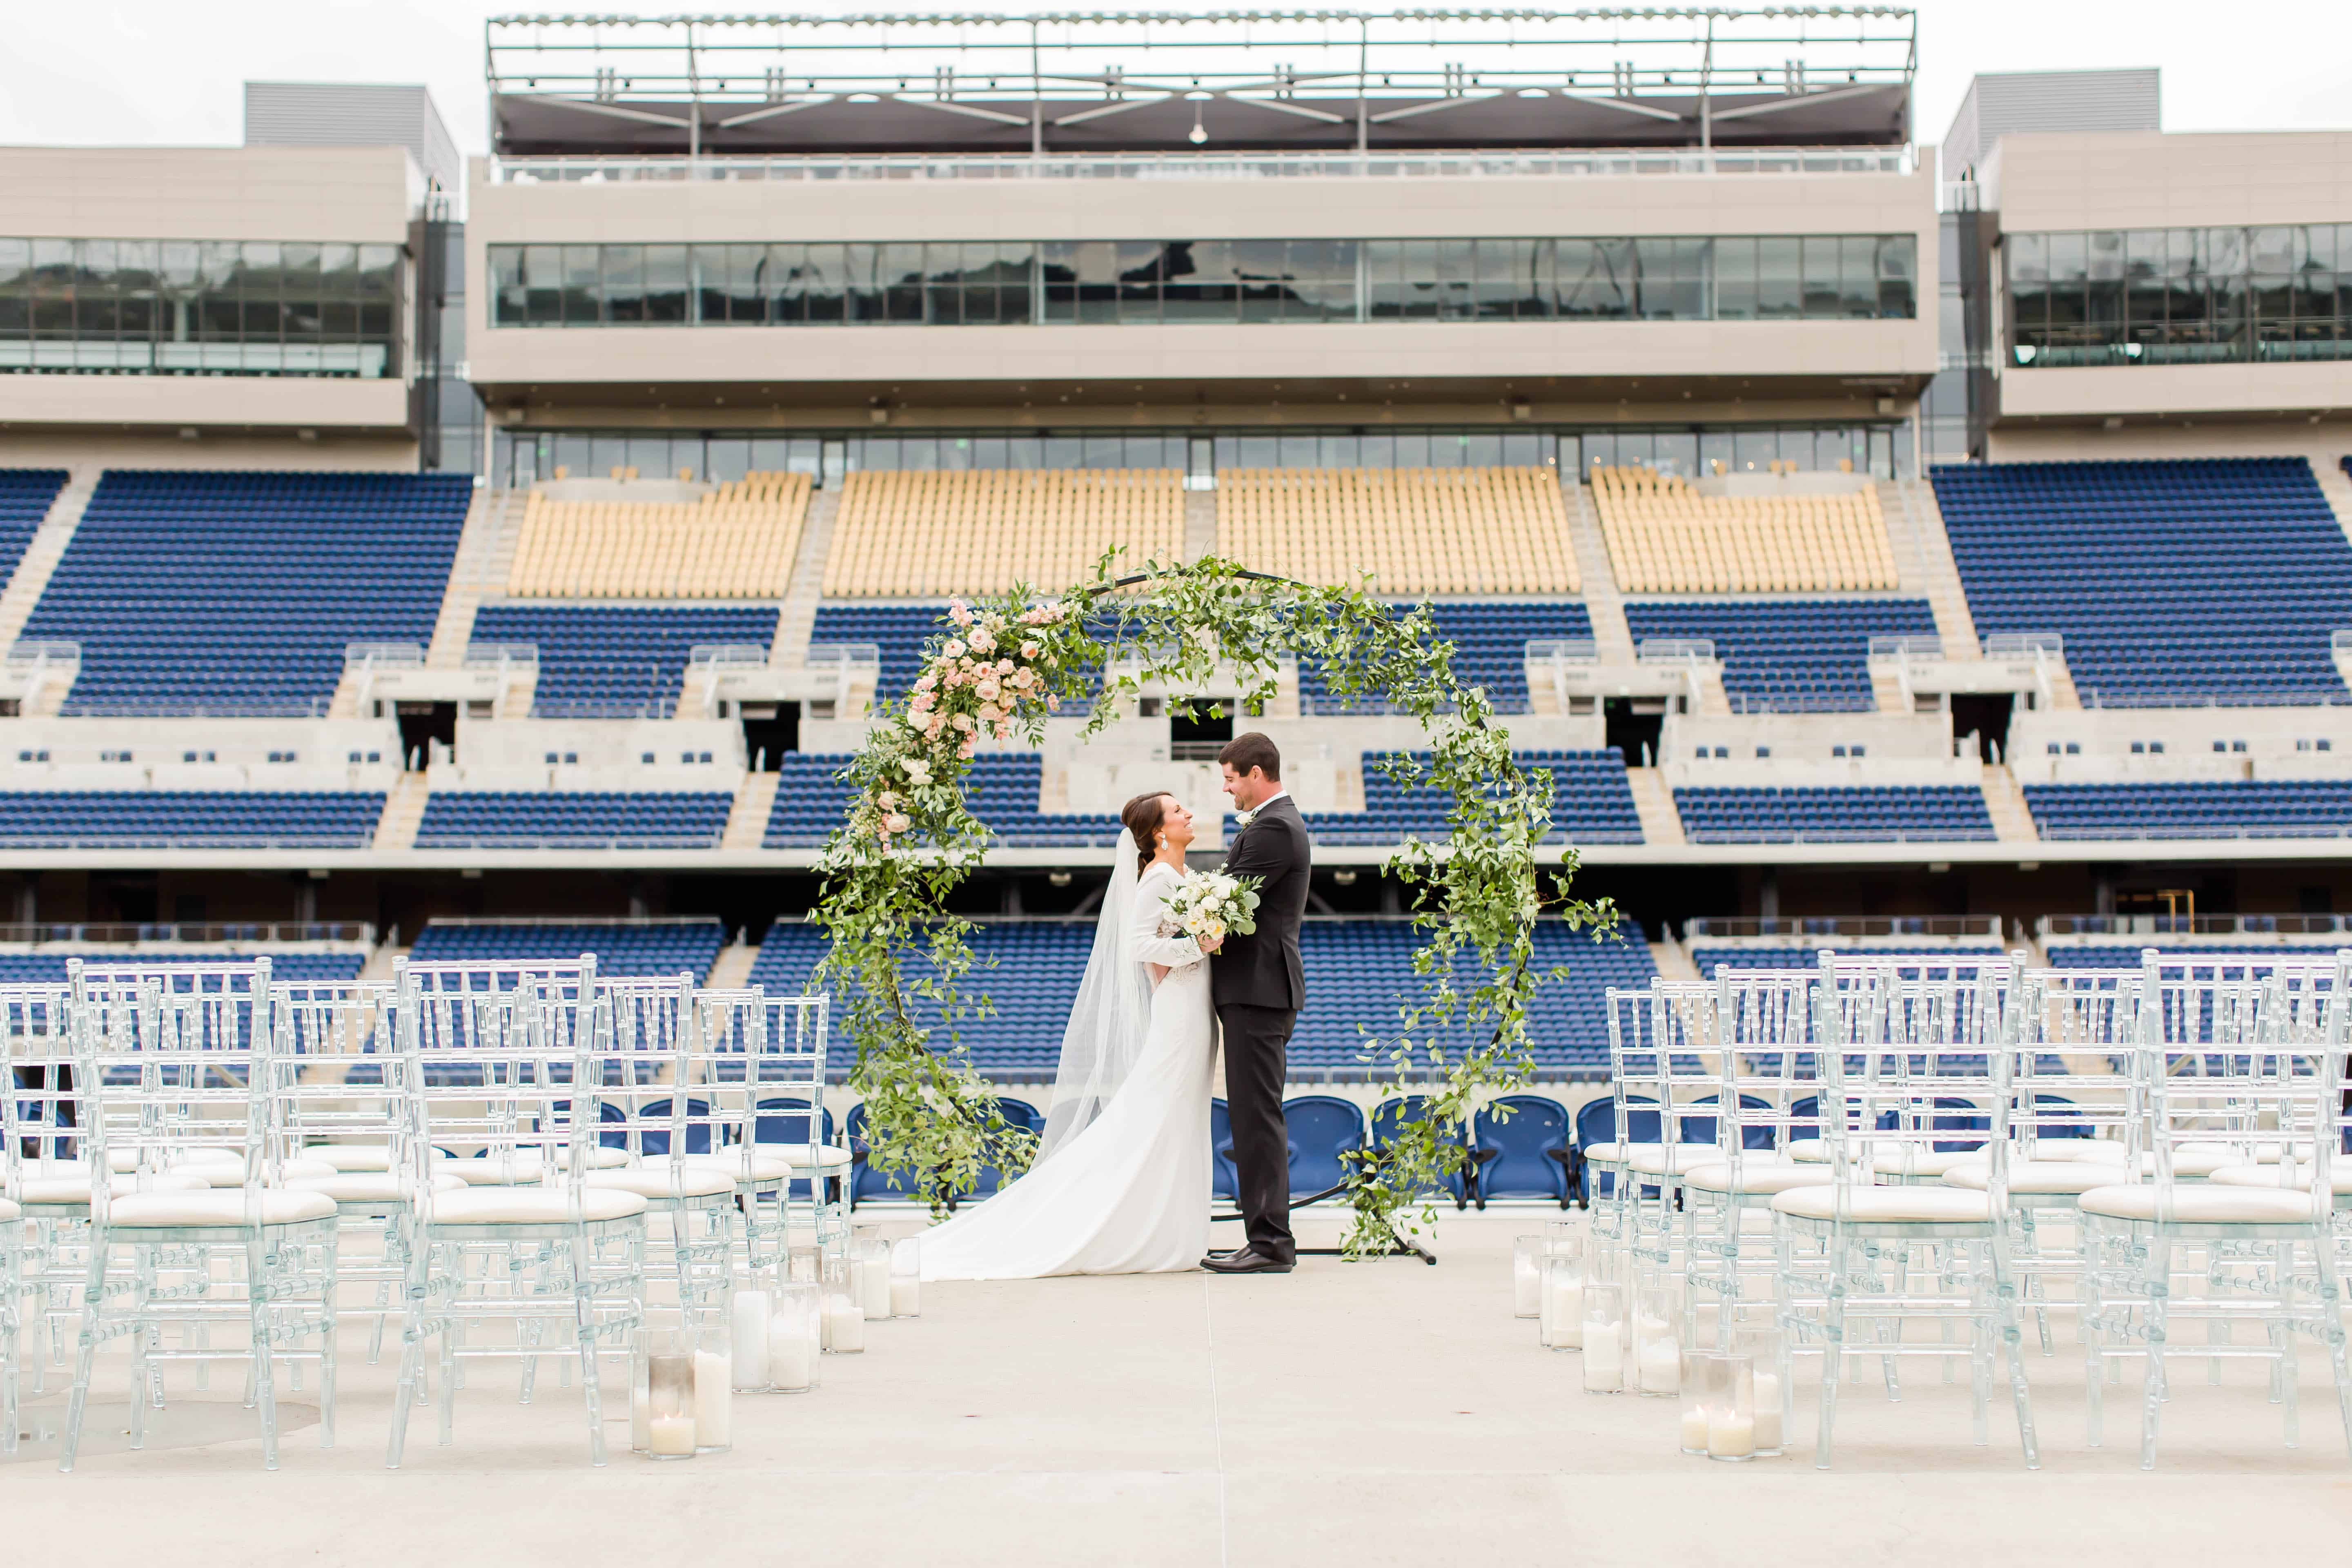 Bride and Groom standing at their ceremony site at the Tom Benson Hall of Fame Stadium photographed by Akron Ohio Wedding Photographer Loren Jackson Photography